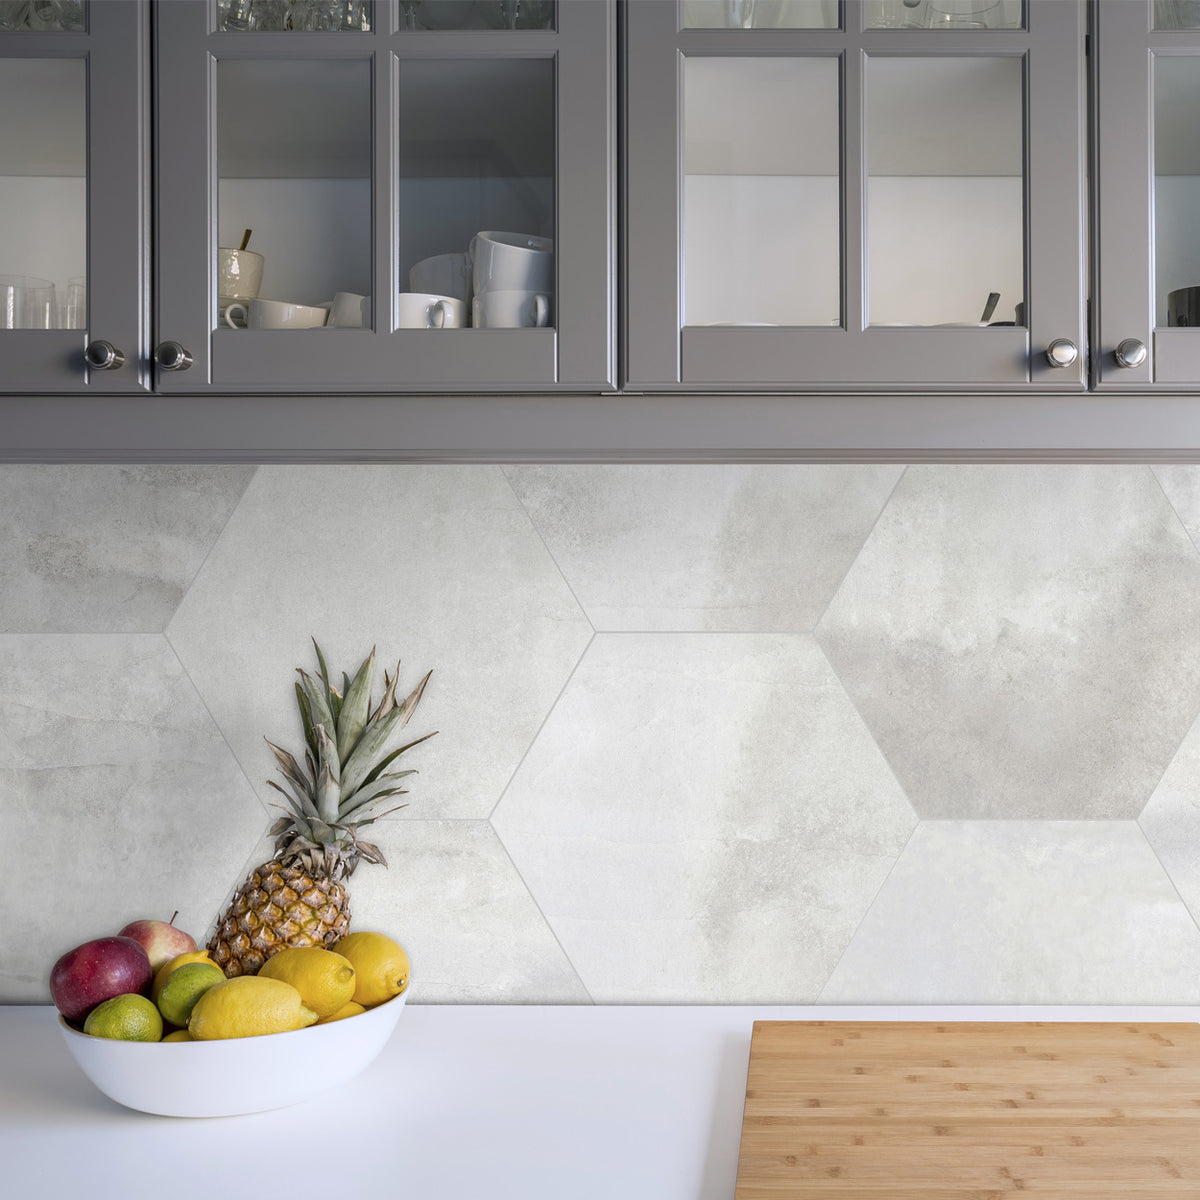 Lungarno Ceramics - Disk 14 in. x 16 in. Porcelain Hexagon Tile - Grey Wall Install